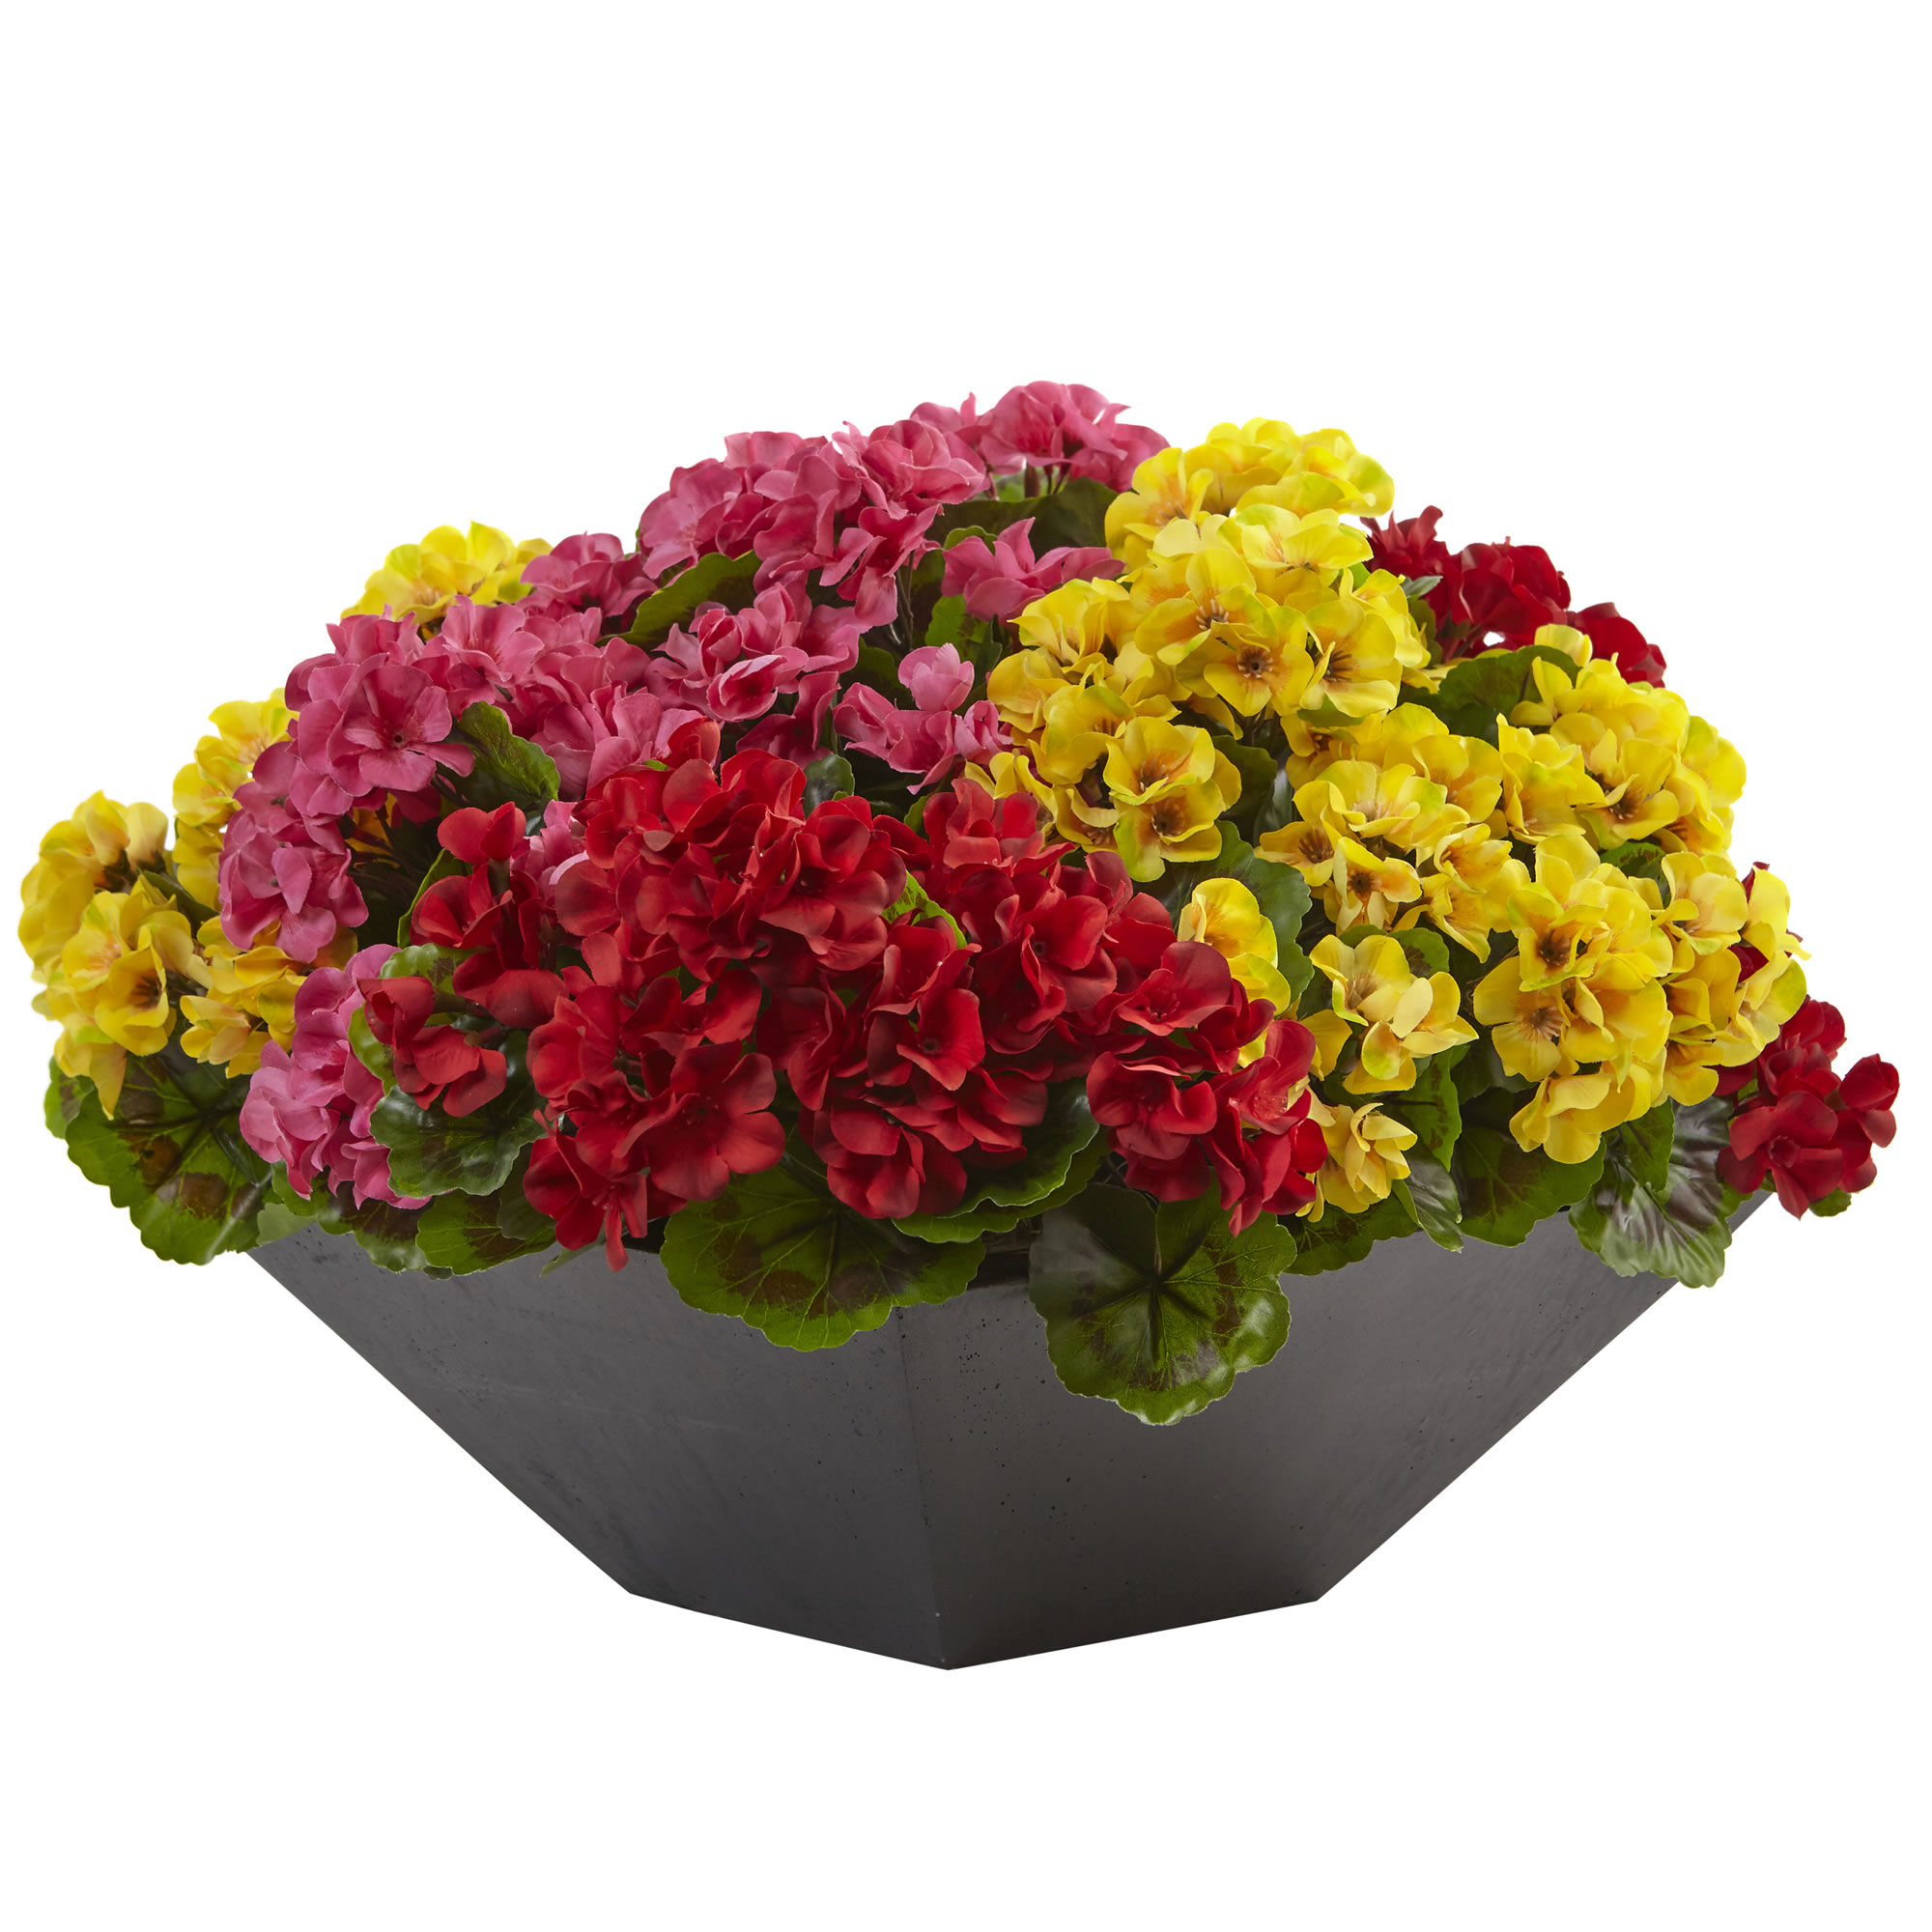 15 Inch Geranium In Black Planter: Limited Uv Protection